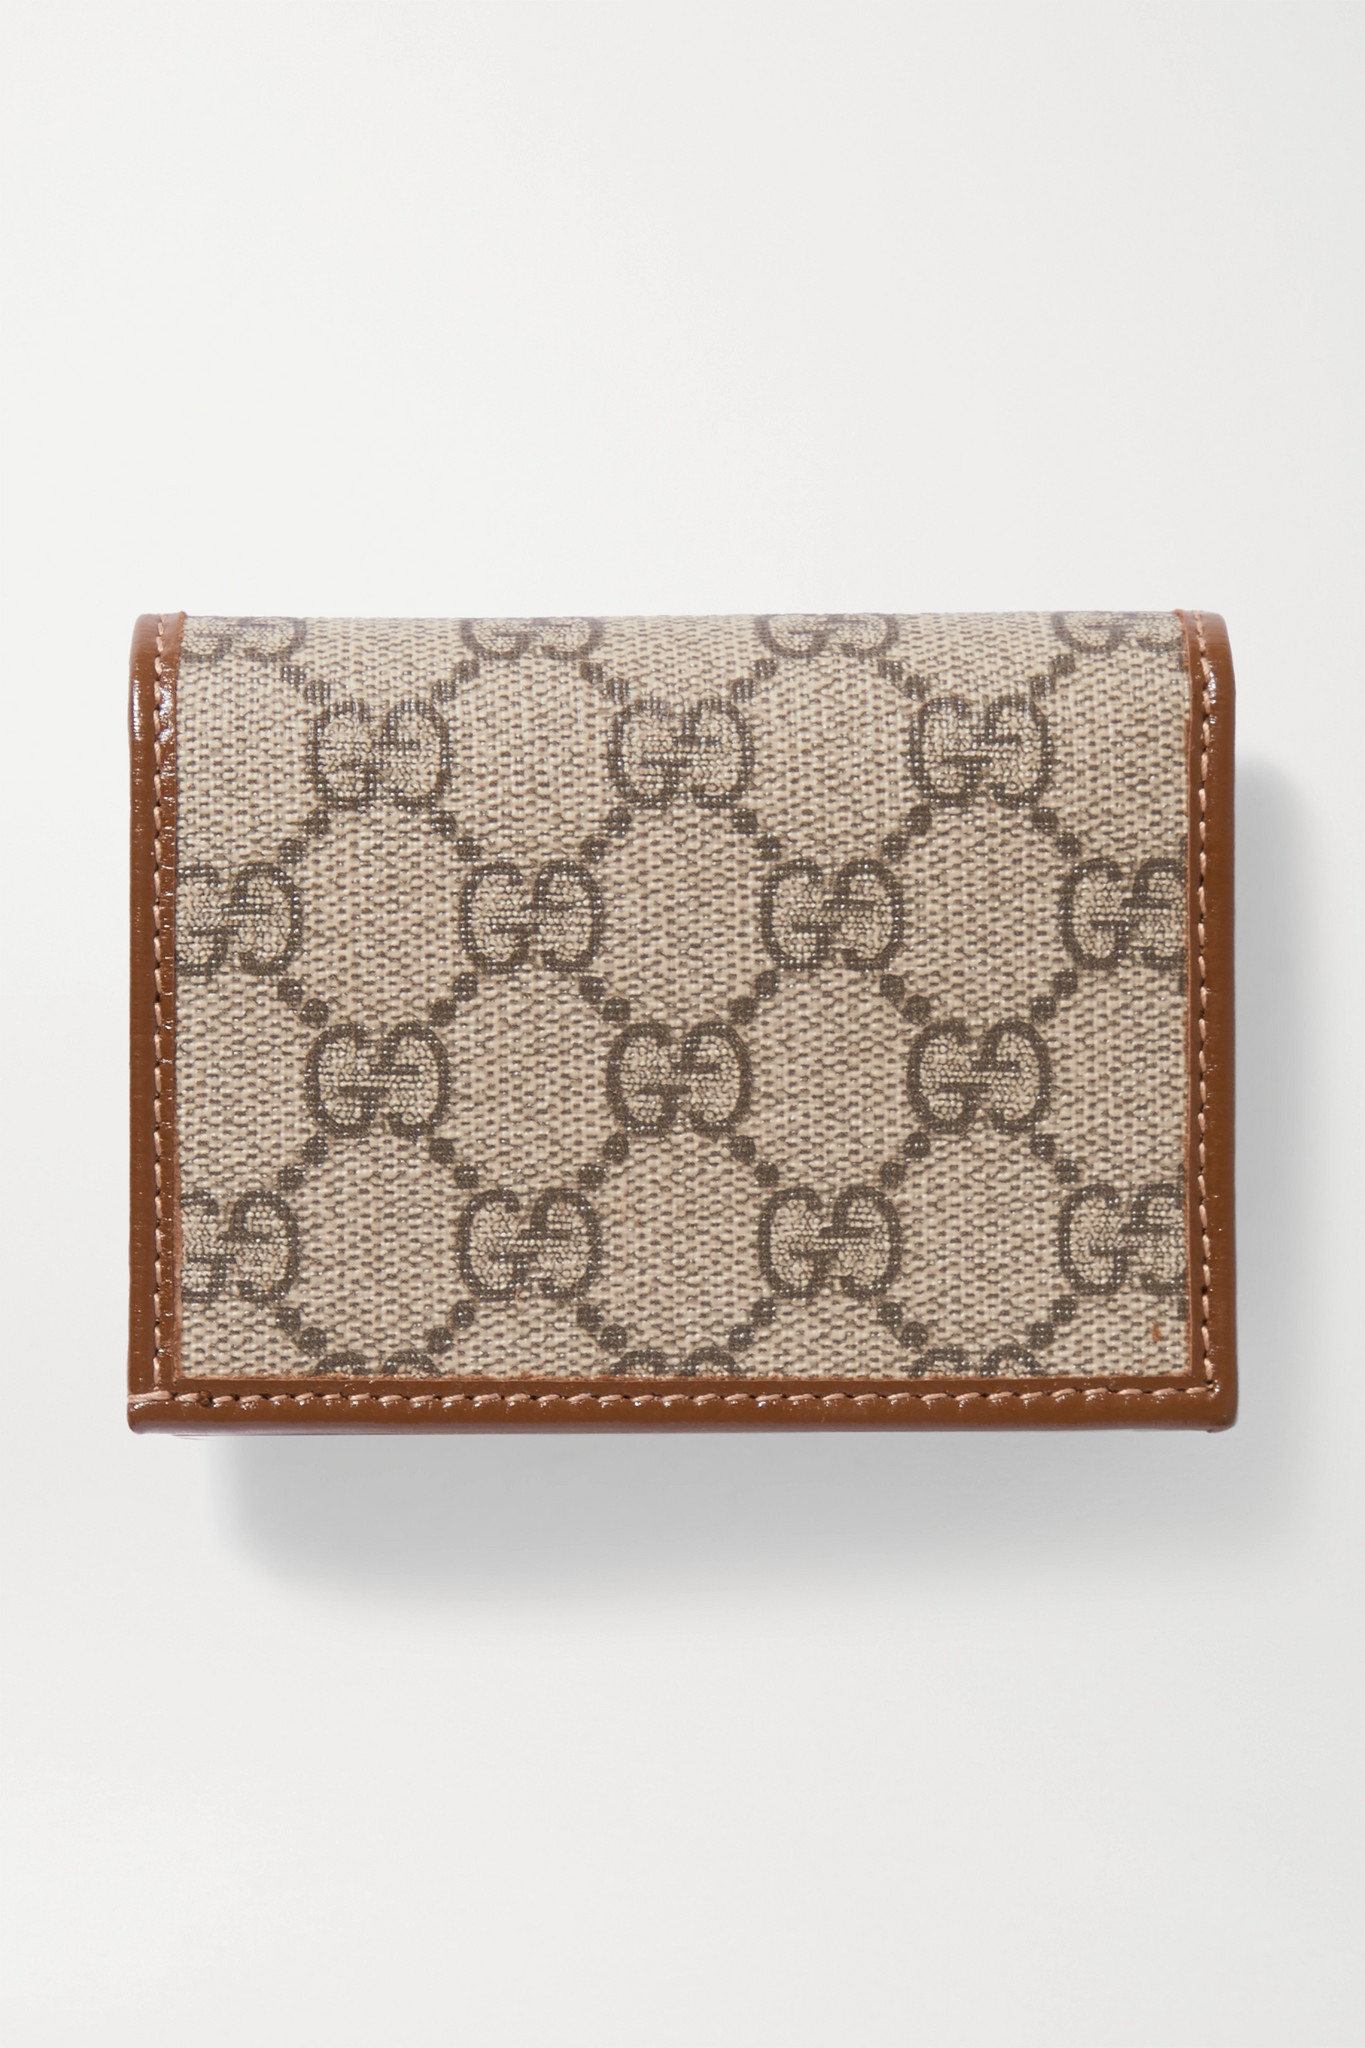 GUCCI Horsebit 1955 leather-trimmed printed coated-canvas wallet